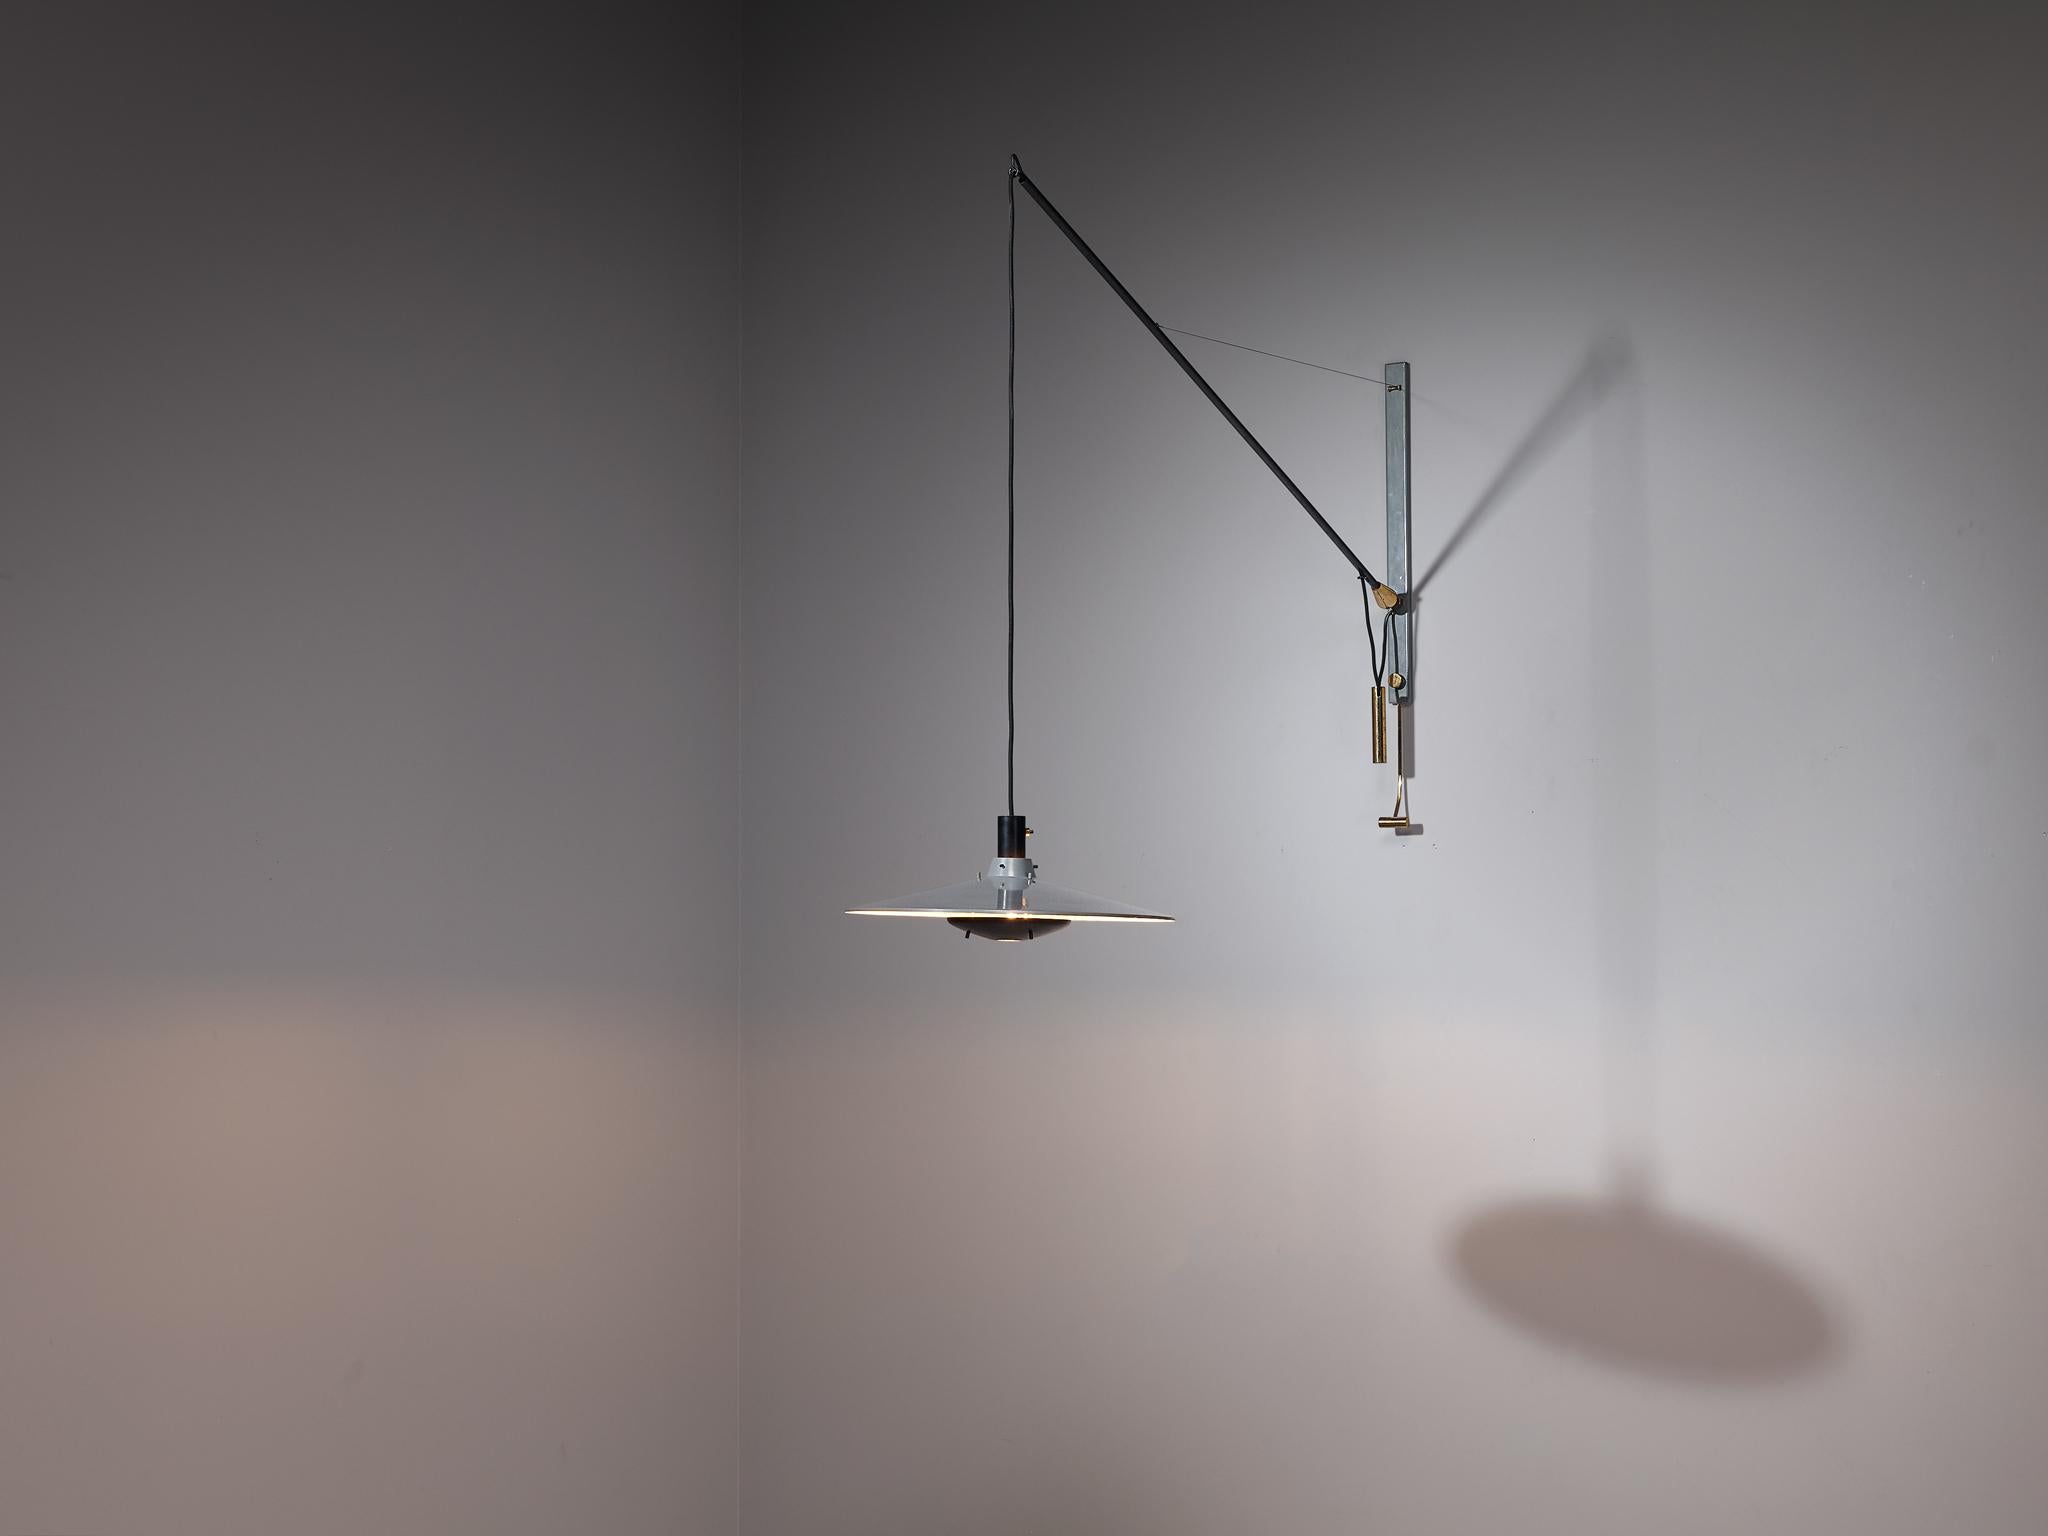 Gino Sarfatti for Arteluce, wall light, model ‘181’, lacquered steel, coated steel, lacquered aluminum, brass, Italy, 1951

This wall light, a variation on model 181, is designed by the influential designer in the field of lighting design Gino